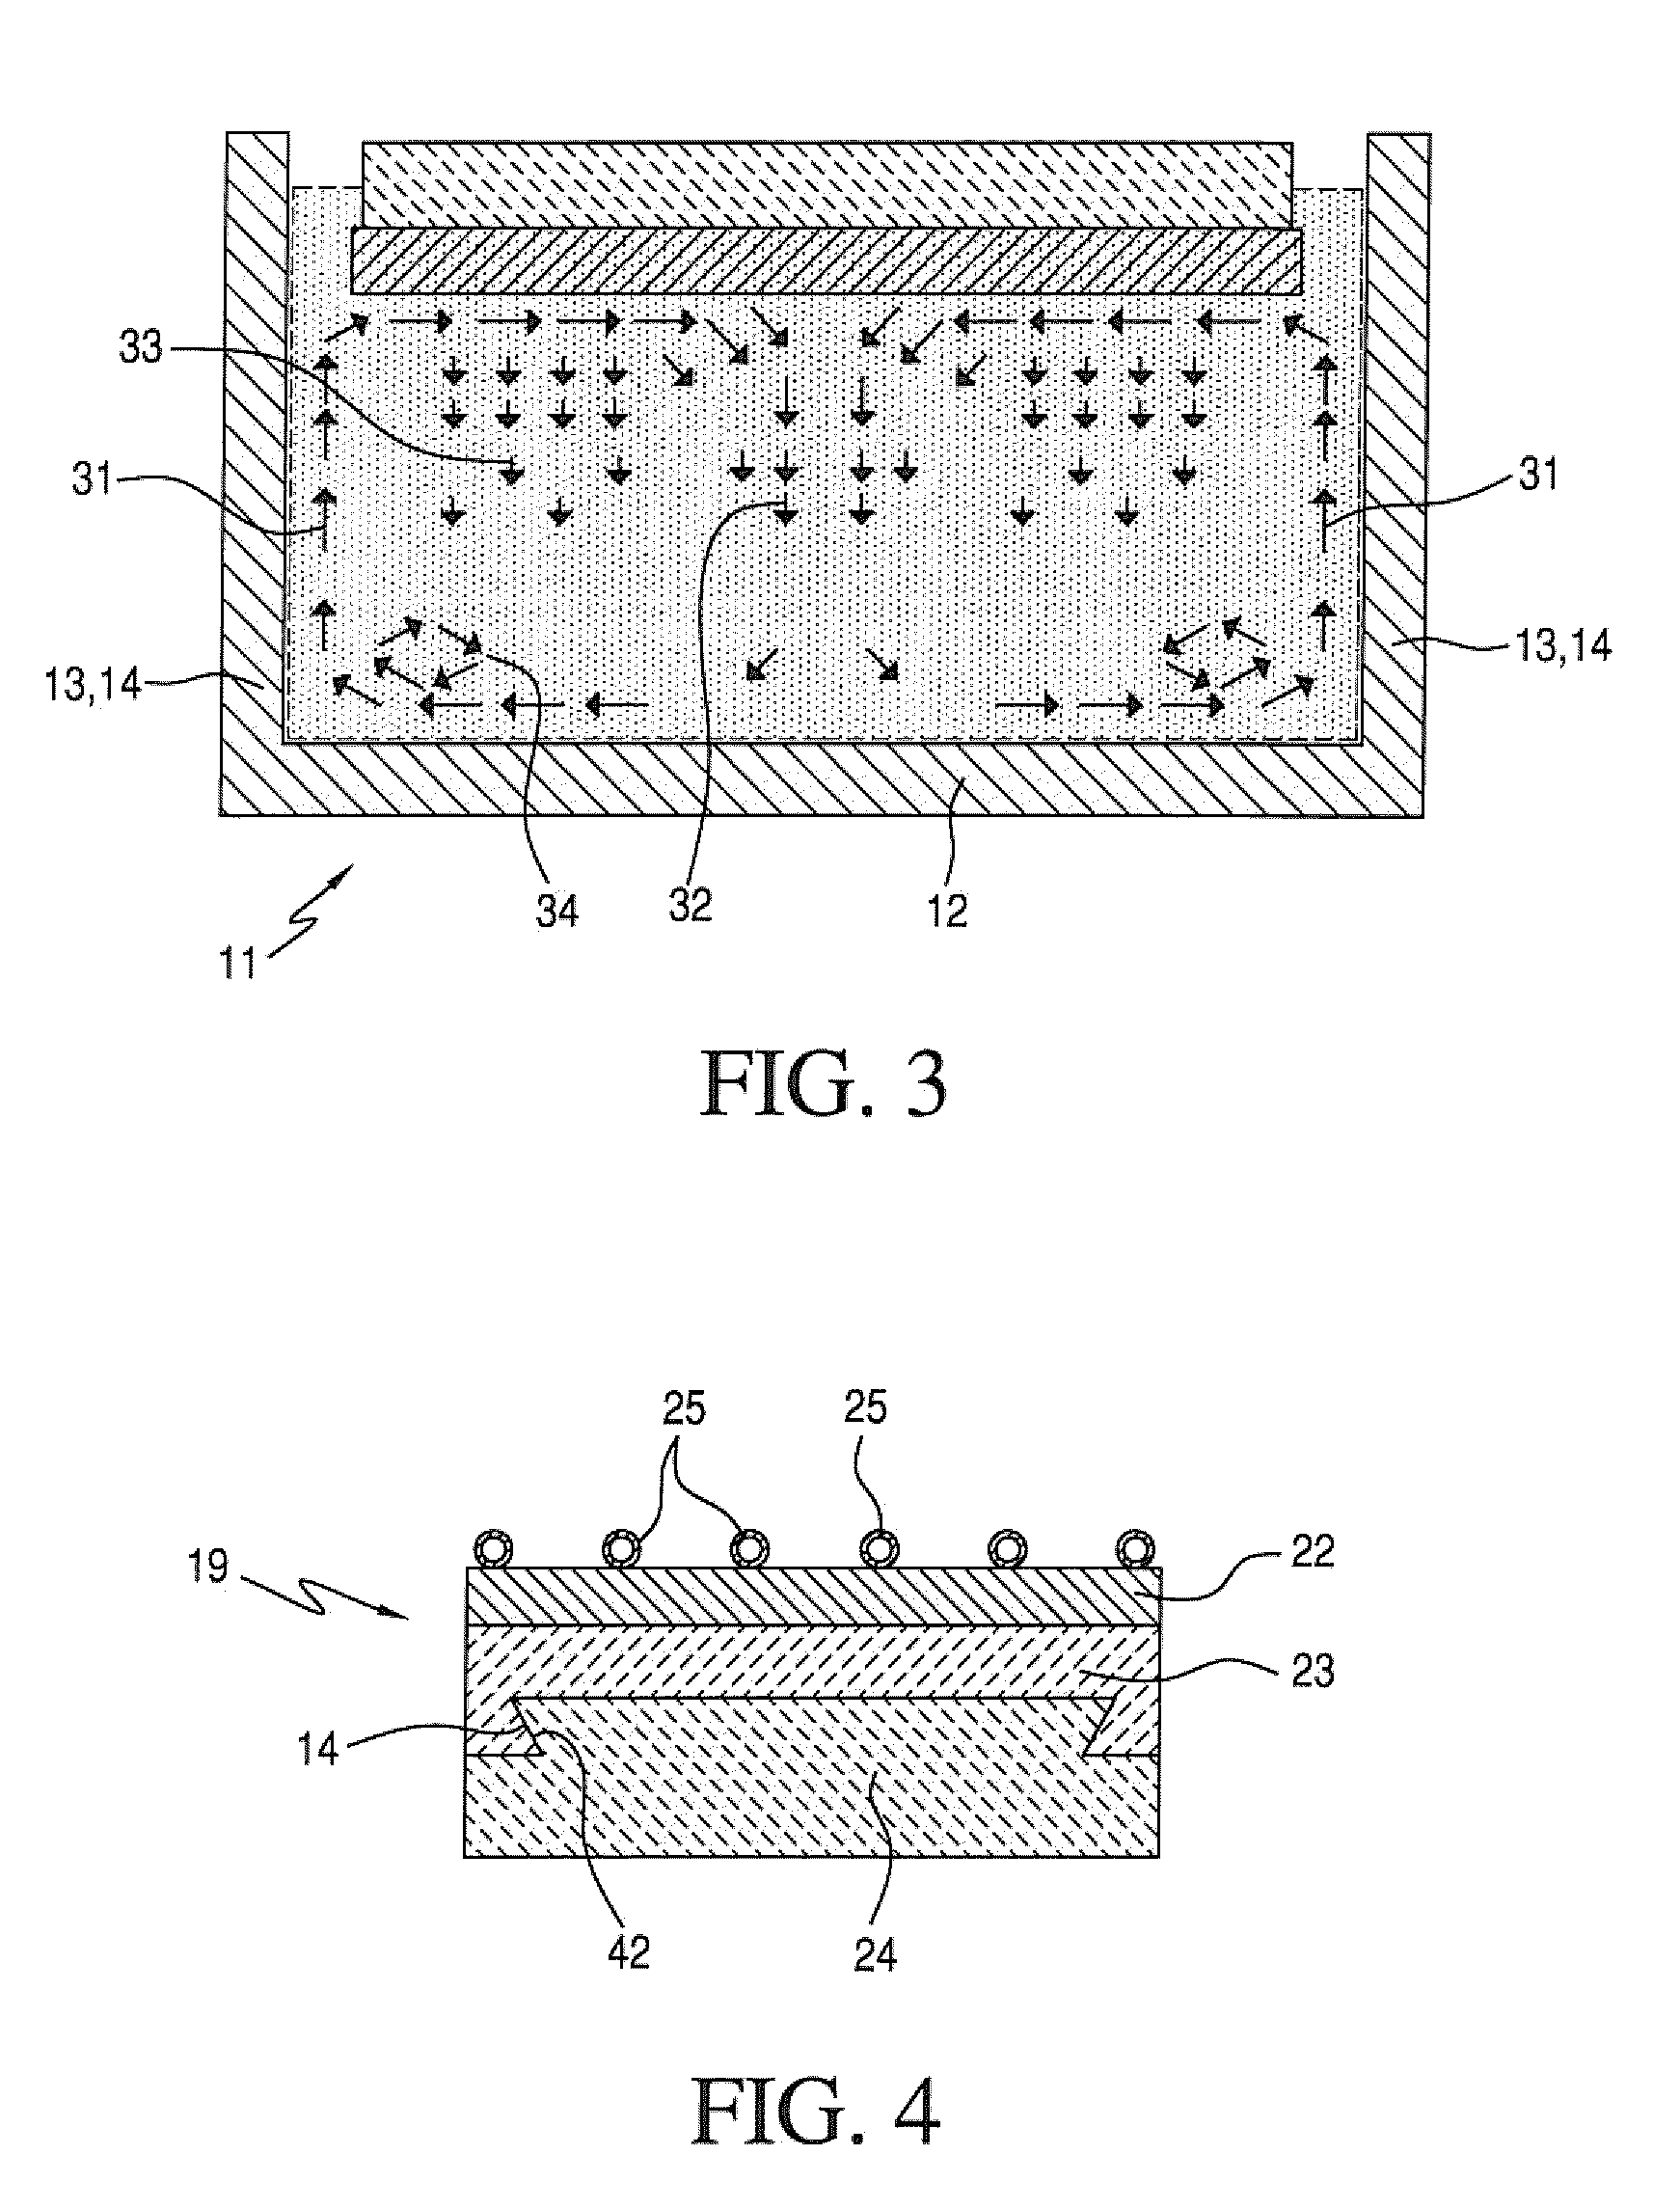 Method and apparatus for refining a molten material